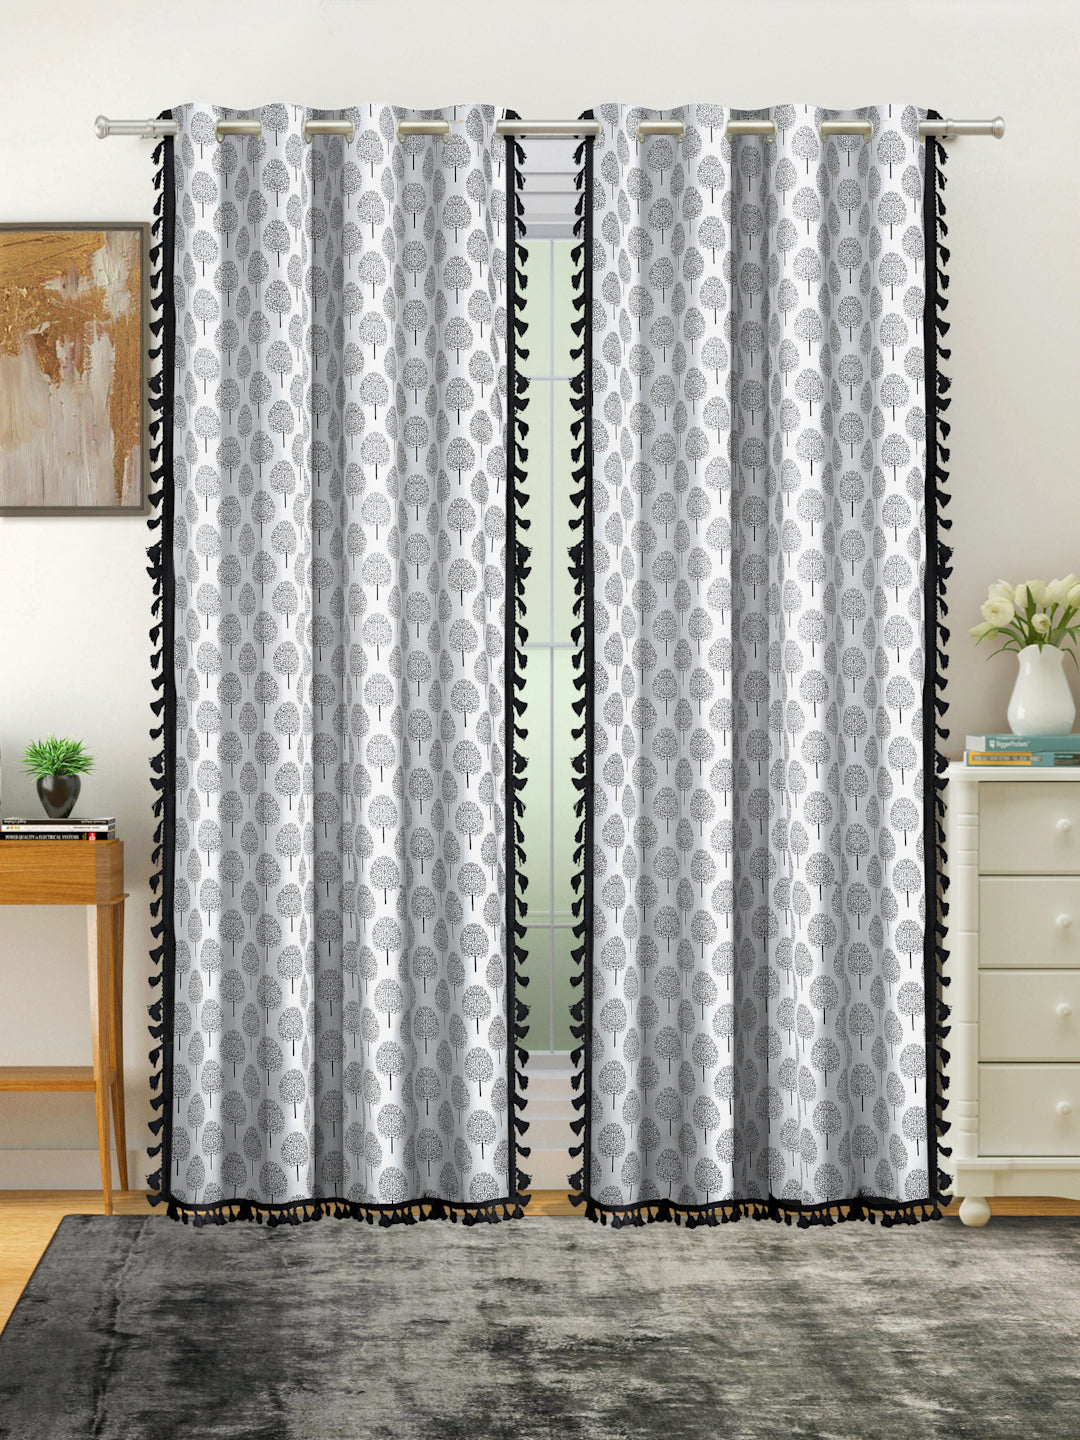 Cotton Printed Boho Light Filtering Door Curtain with Lace- Black and White (Pack of 1)